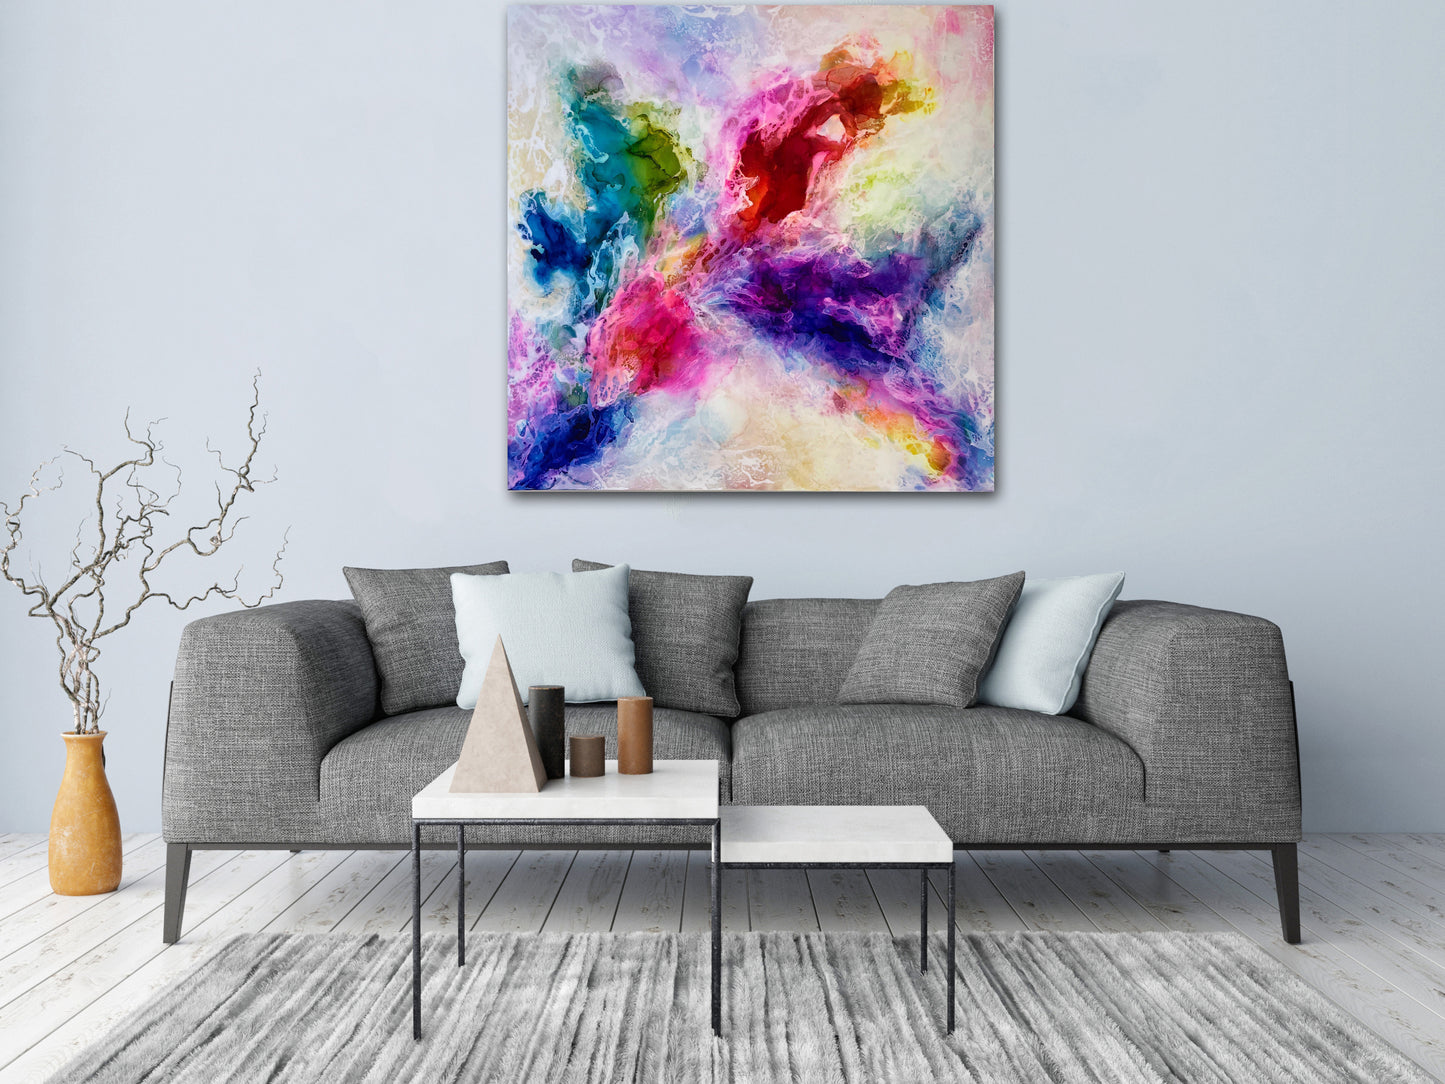 Blurred Dreams Painting | Blurred Painting | E. Wildman Gallery